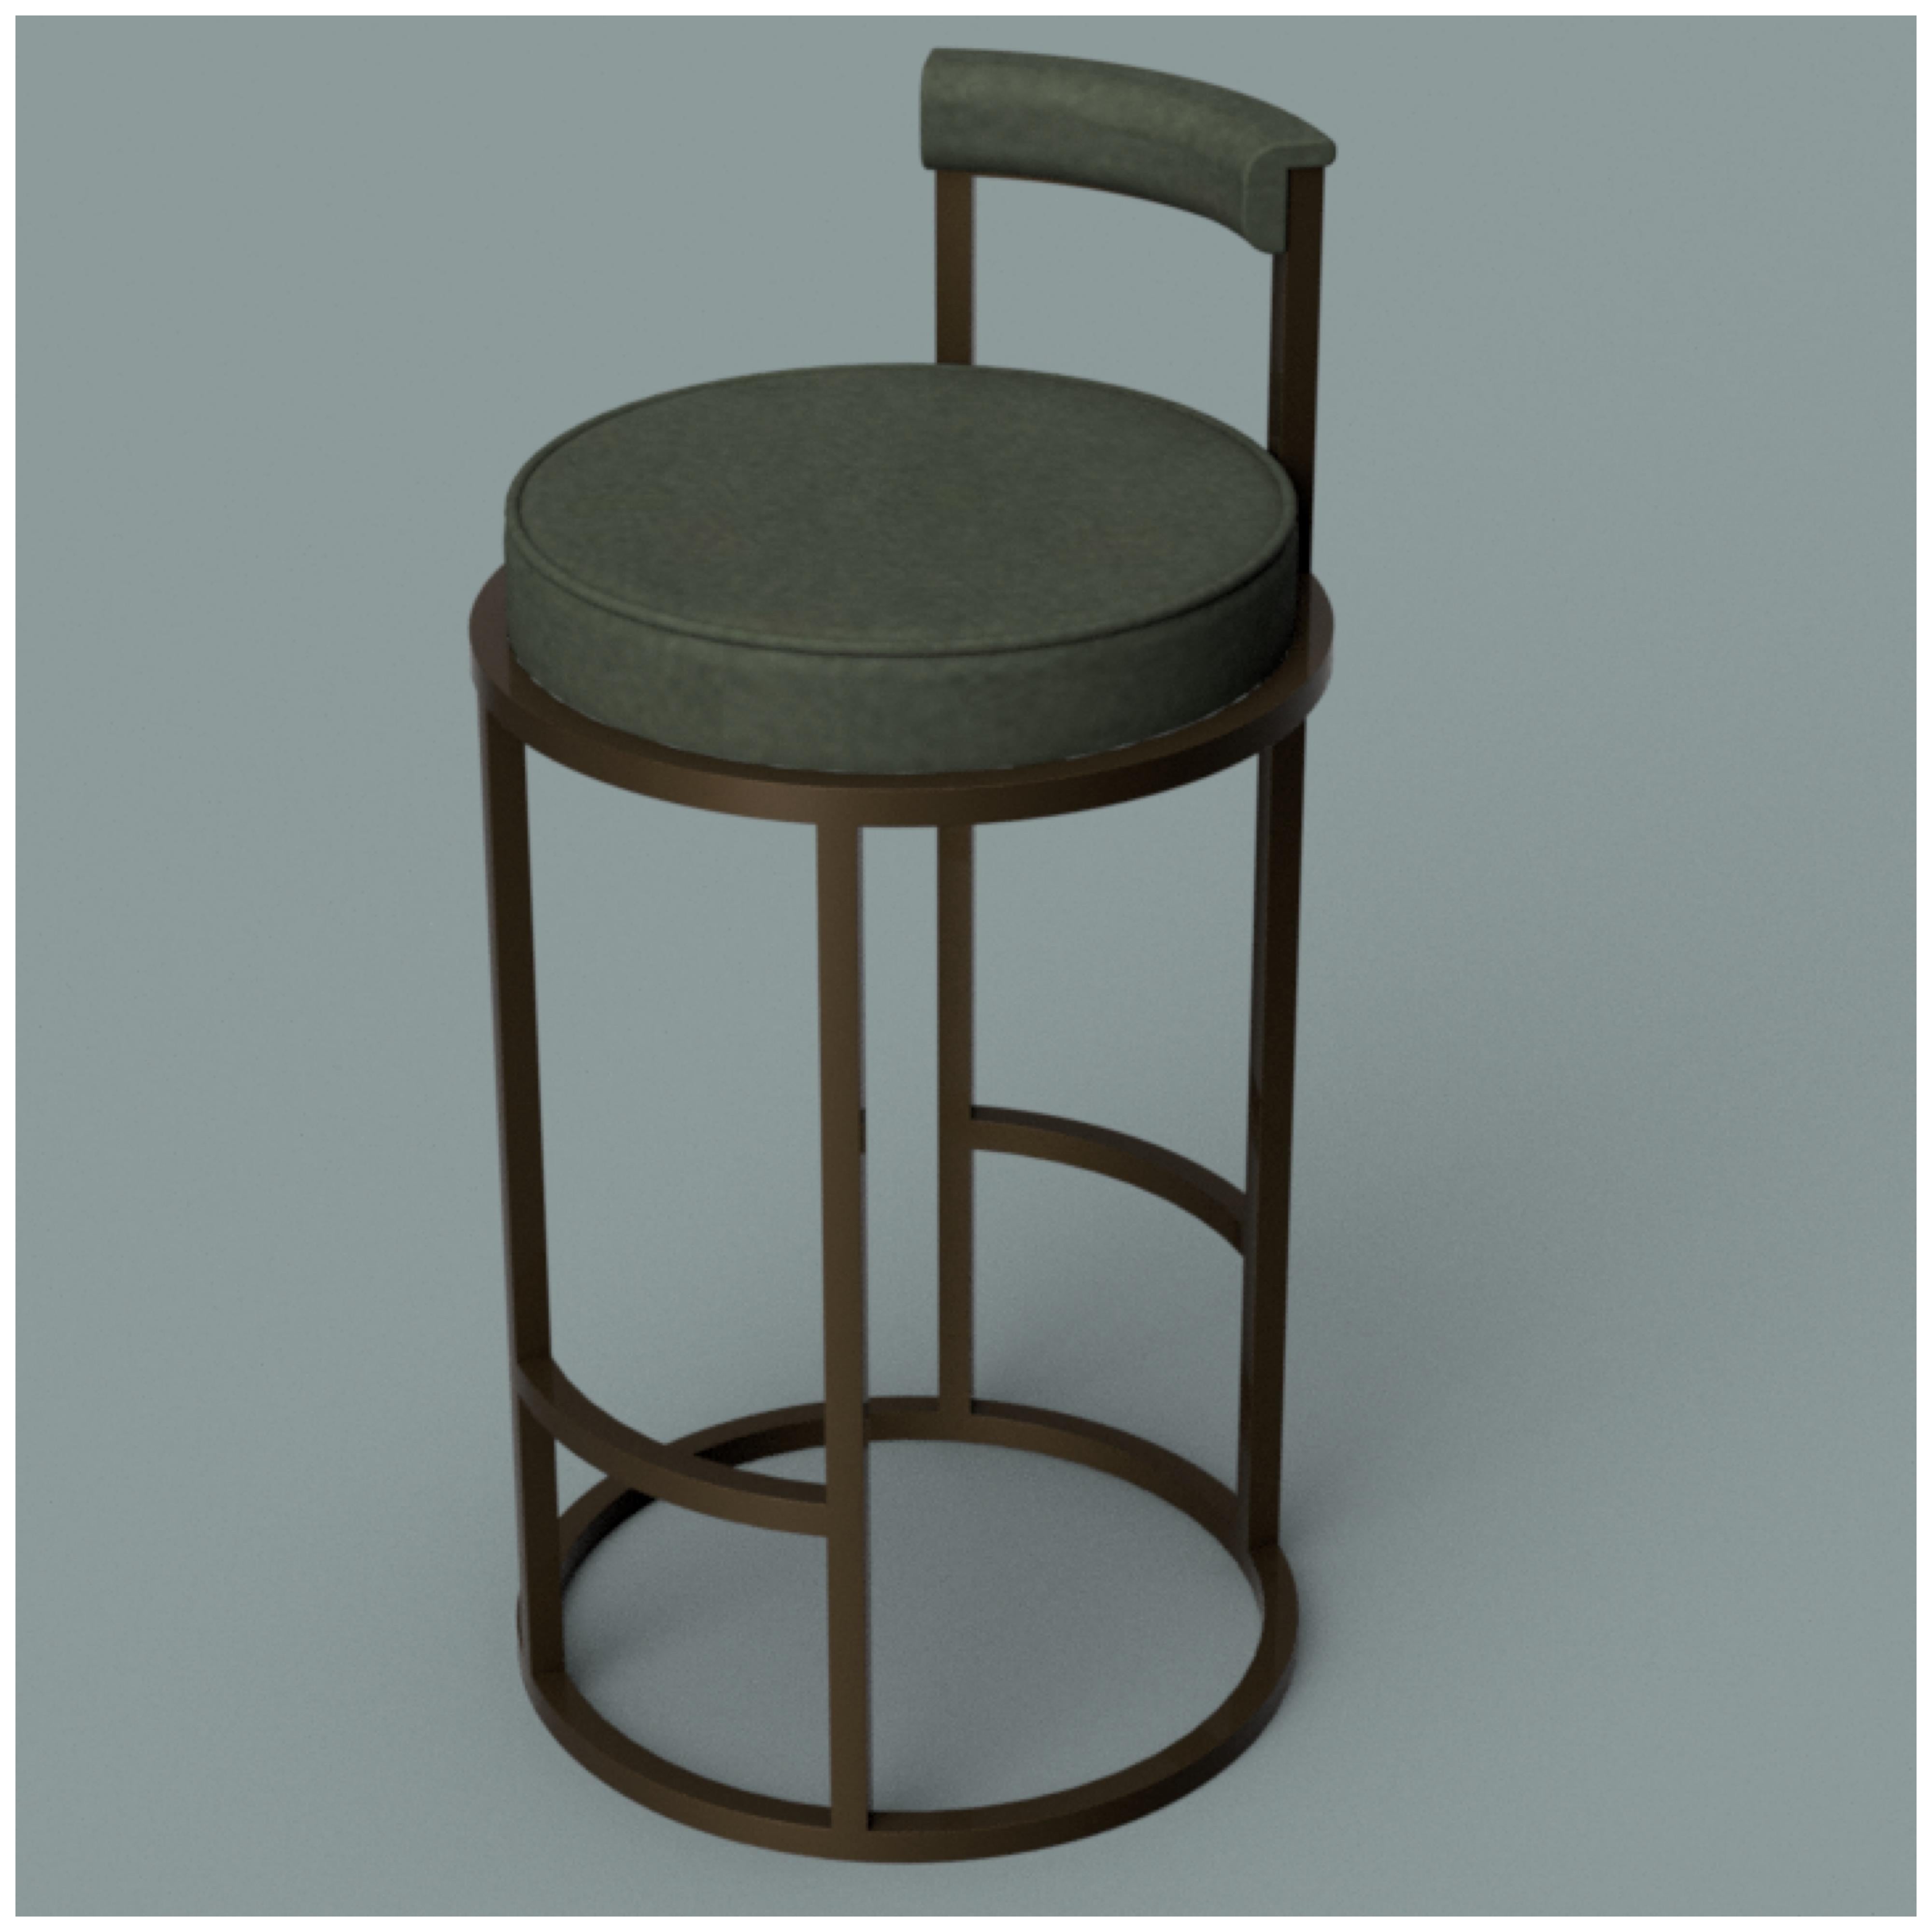 British Diana Bar Stool Circular with Back Rest in Steel Powder-Coated and Novasuede For Sale